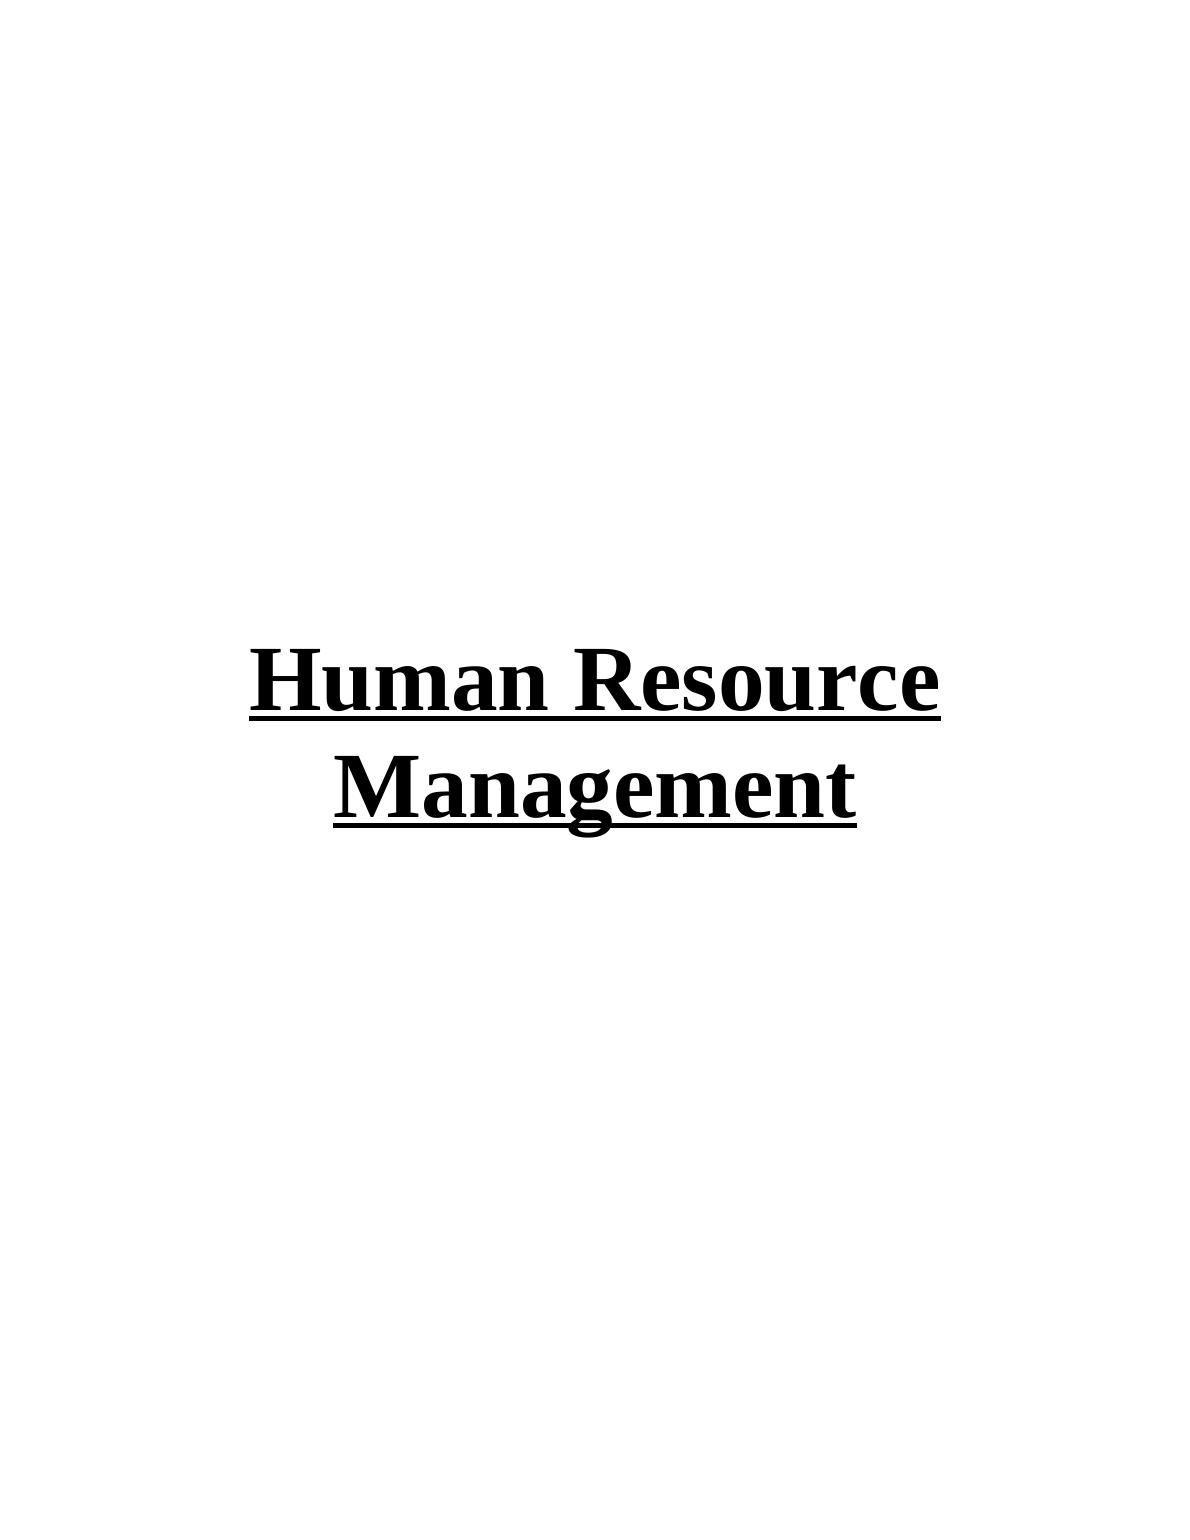 Meaning, Purpose and Functions of HRM_1